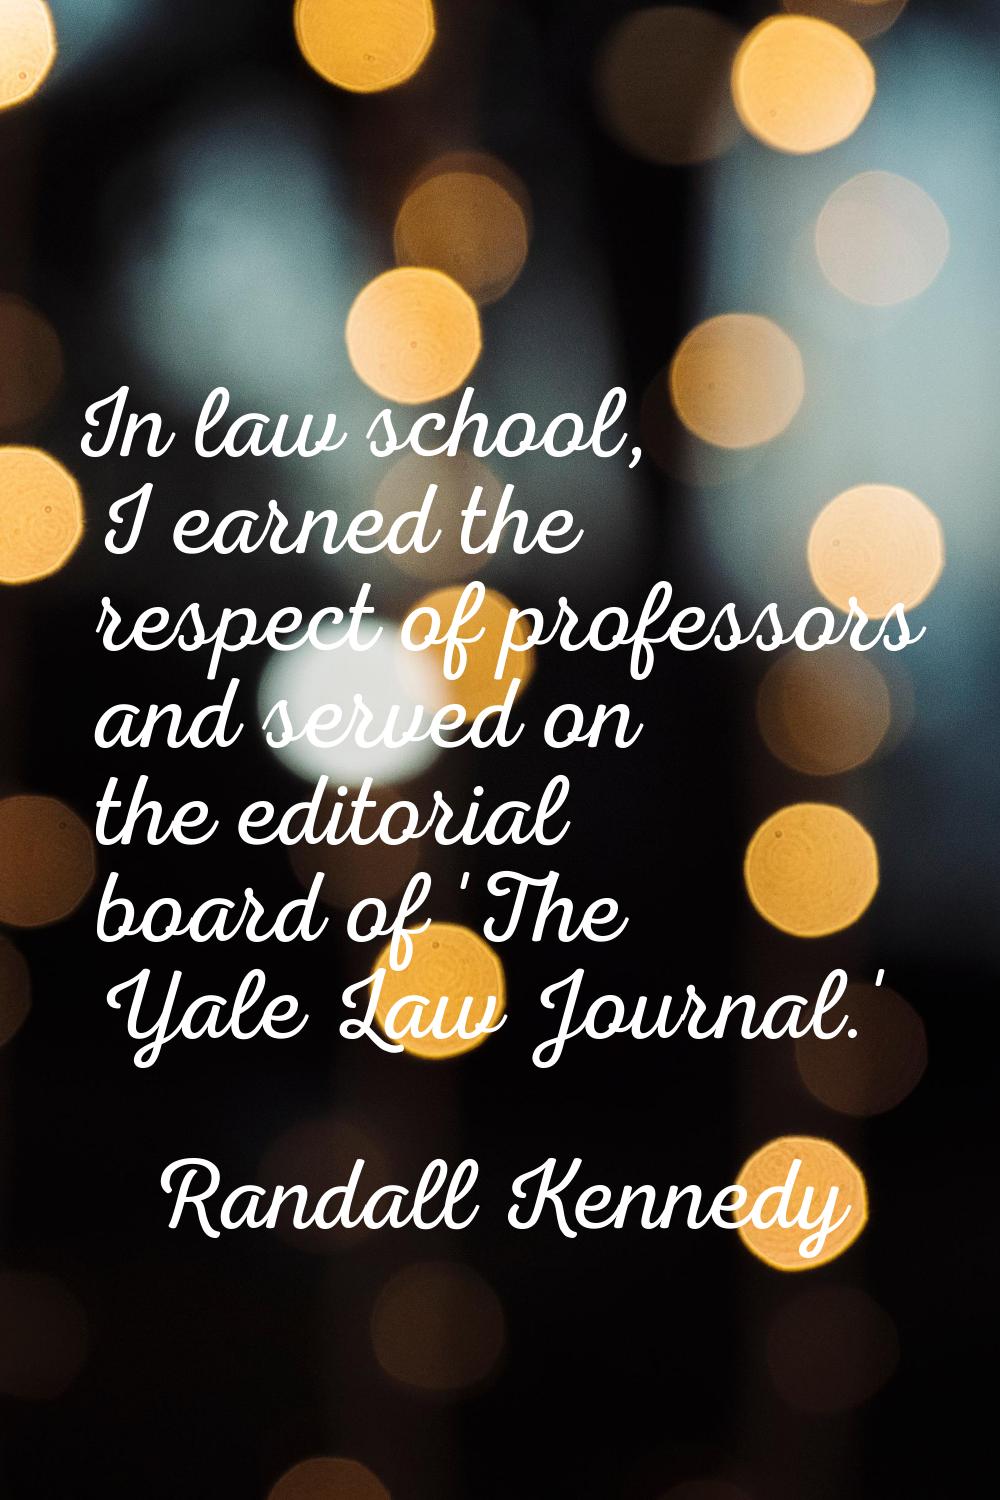 In law school, I earned the respect of professors and served on the editorial board of 'The Yale La